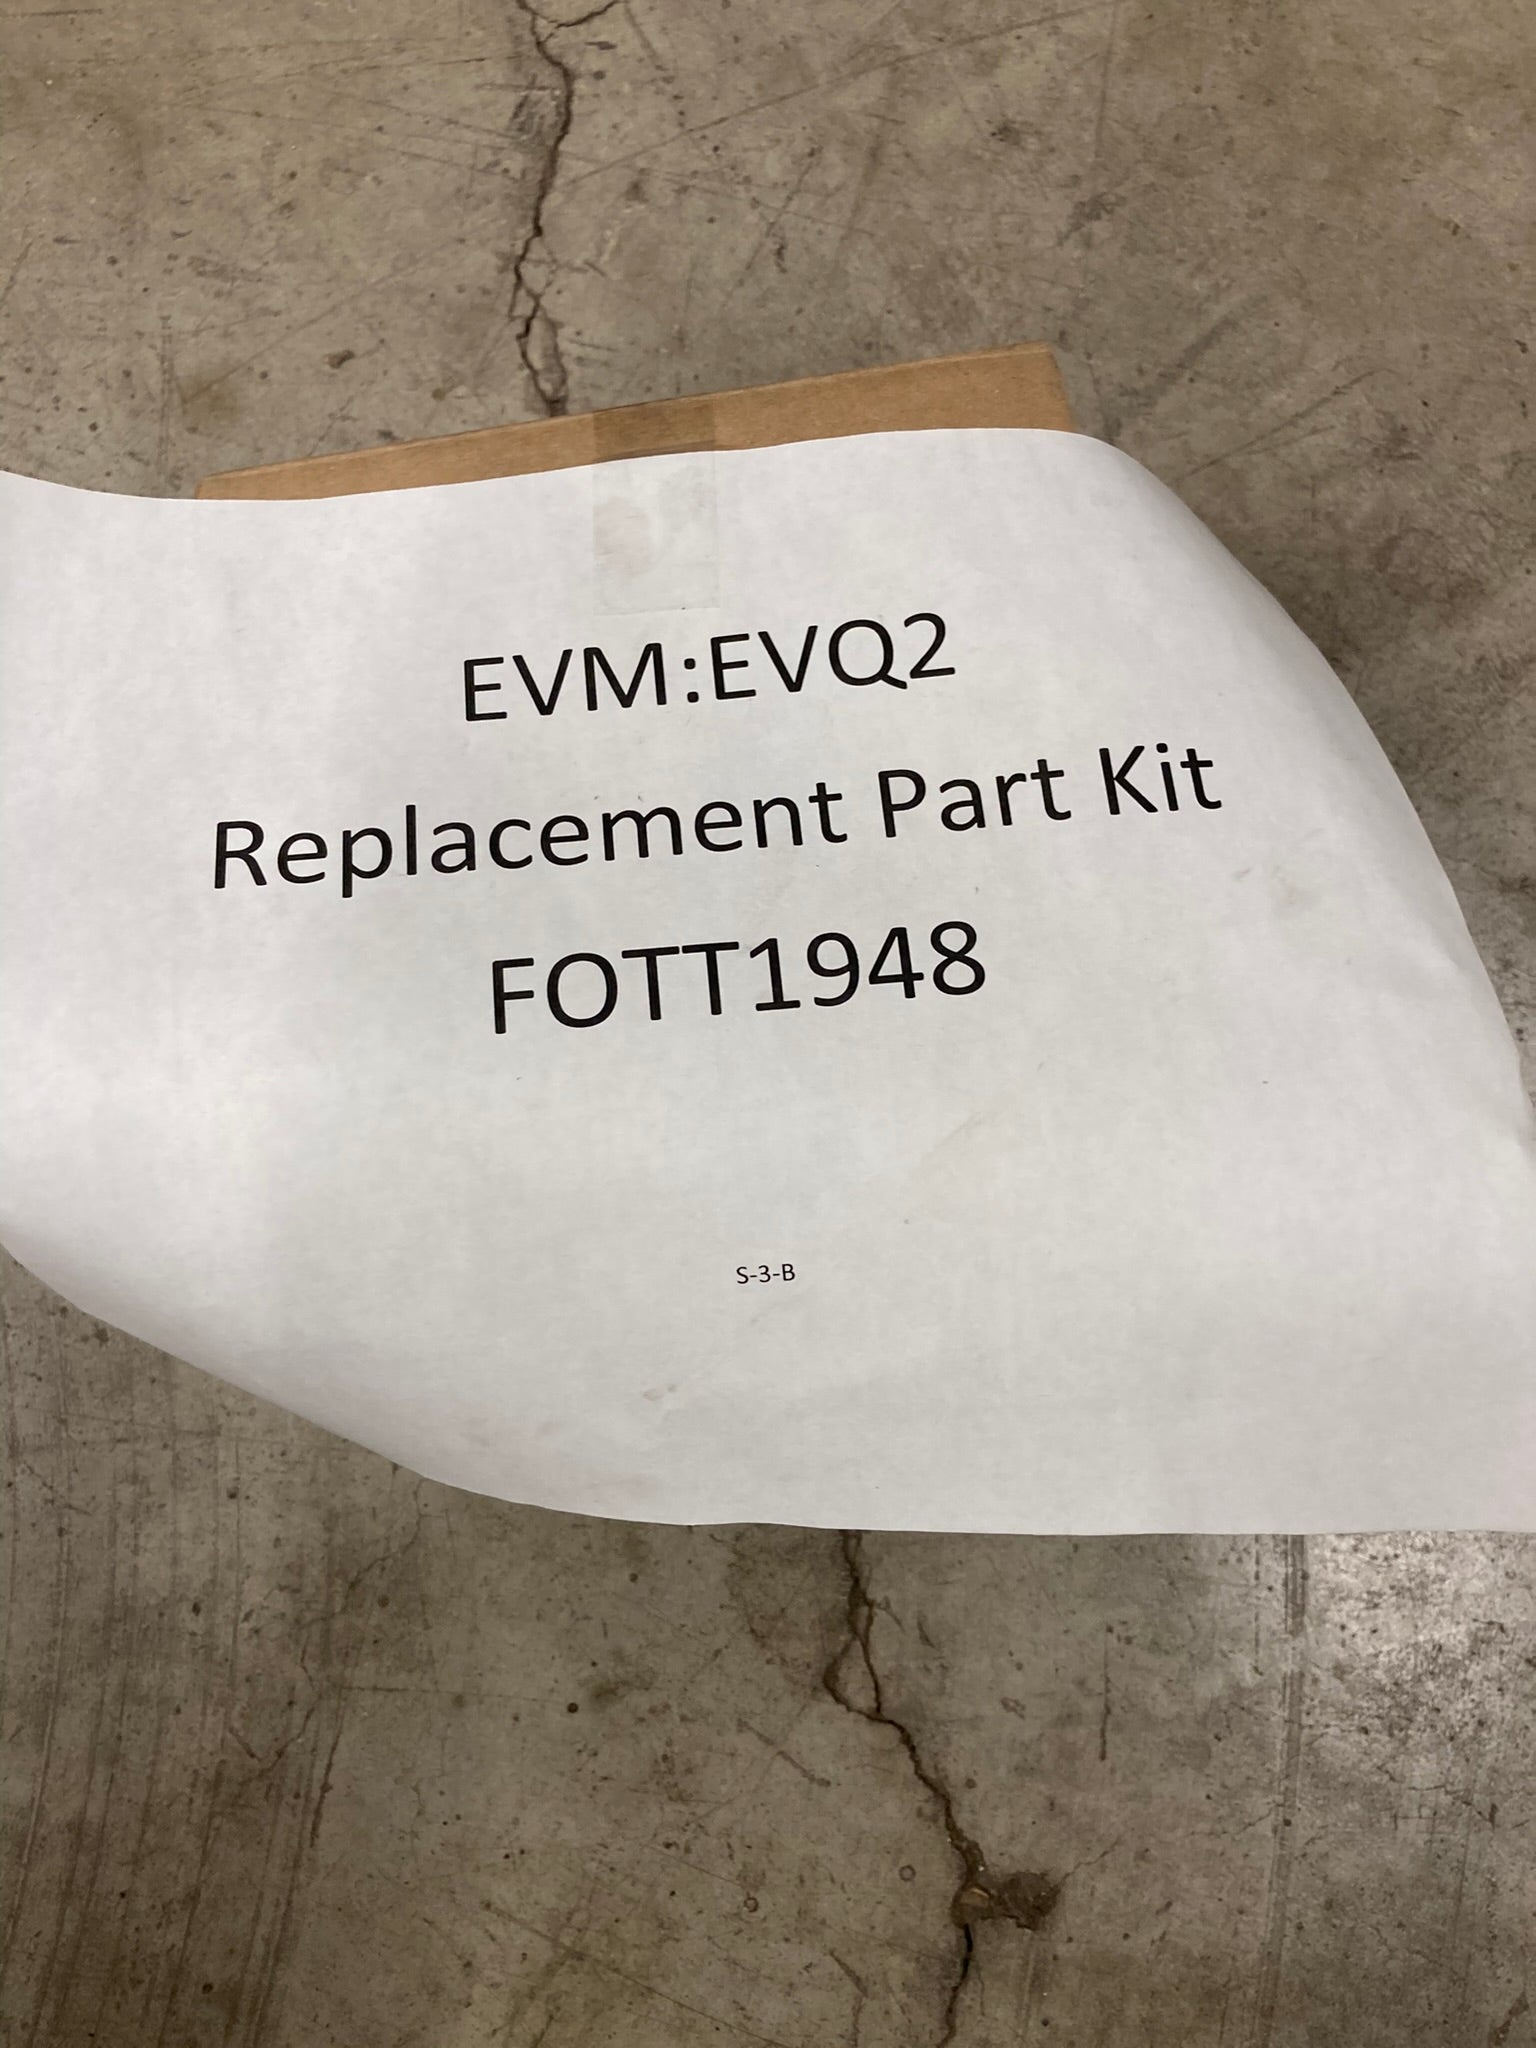 Replacement Part Kit